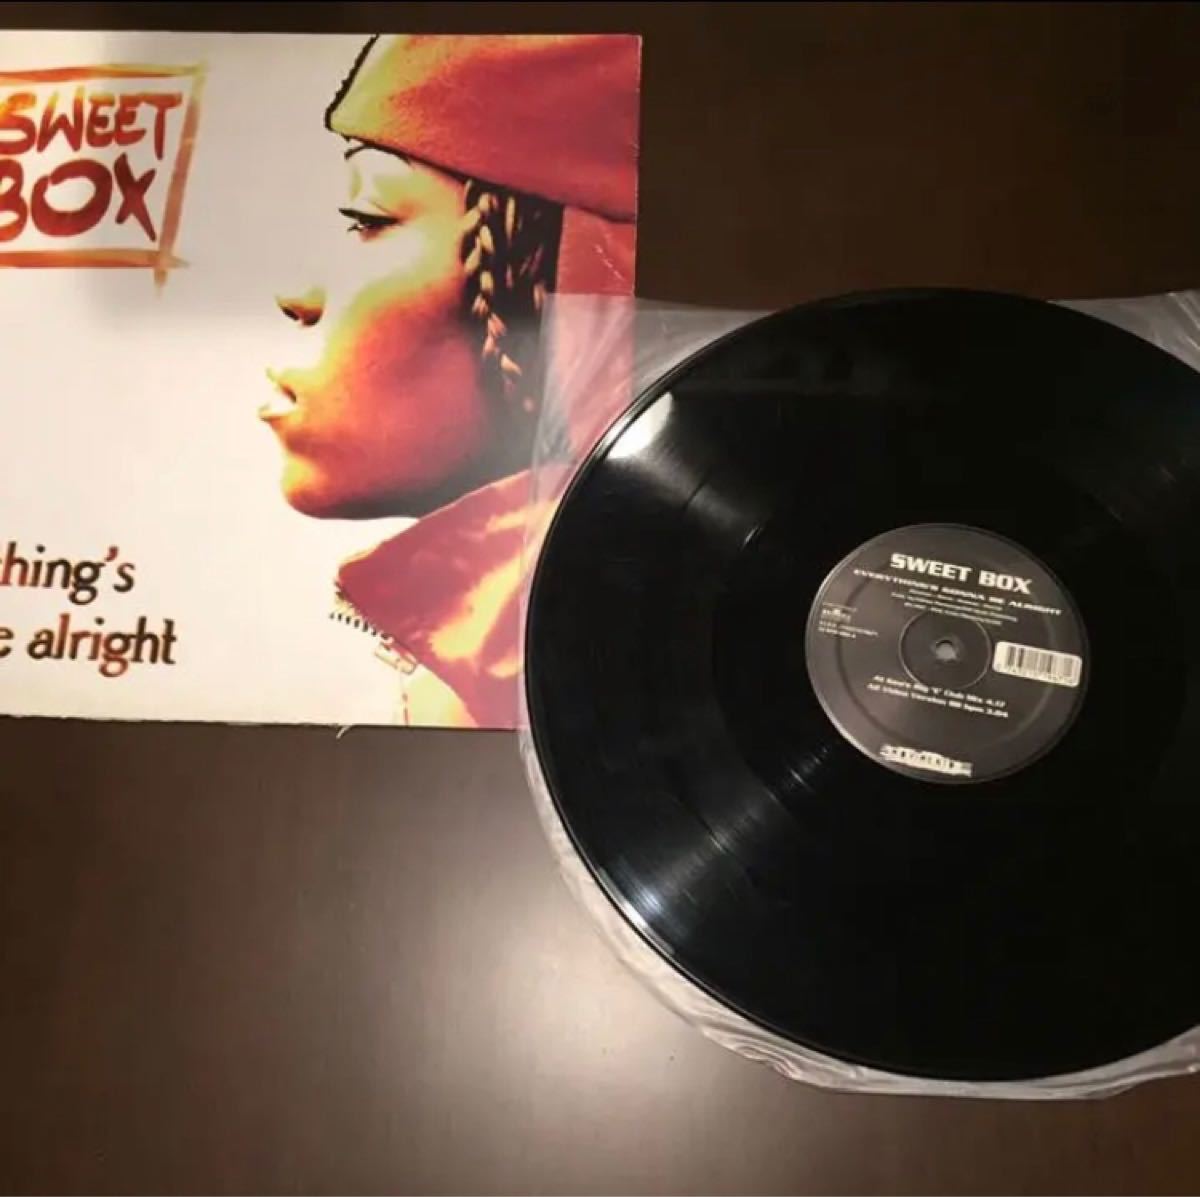 SWEETBOX / EVERYTHING'SGONNABEARIGHT